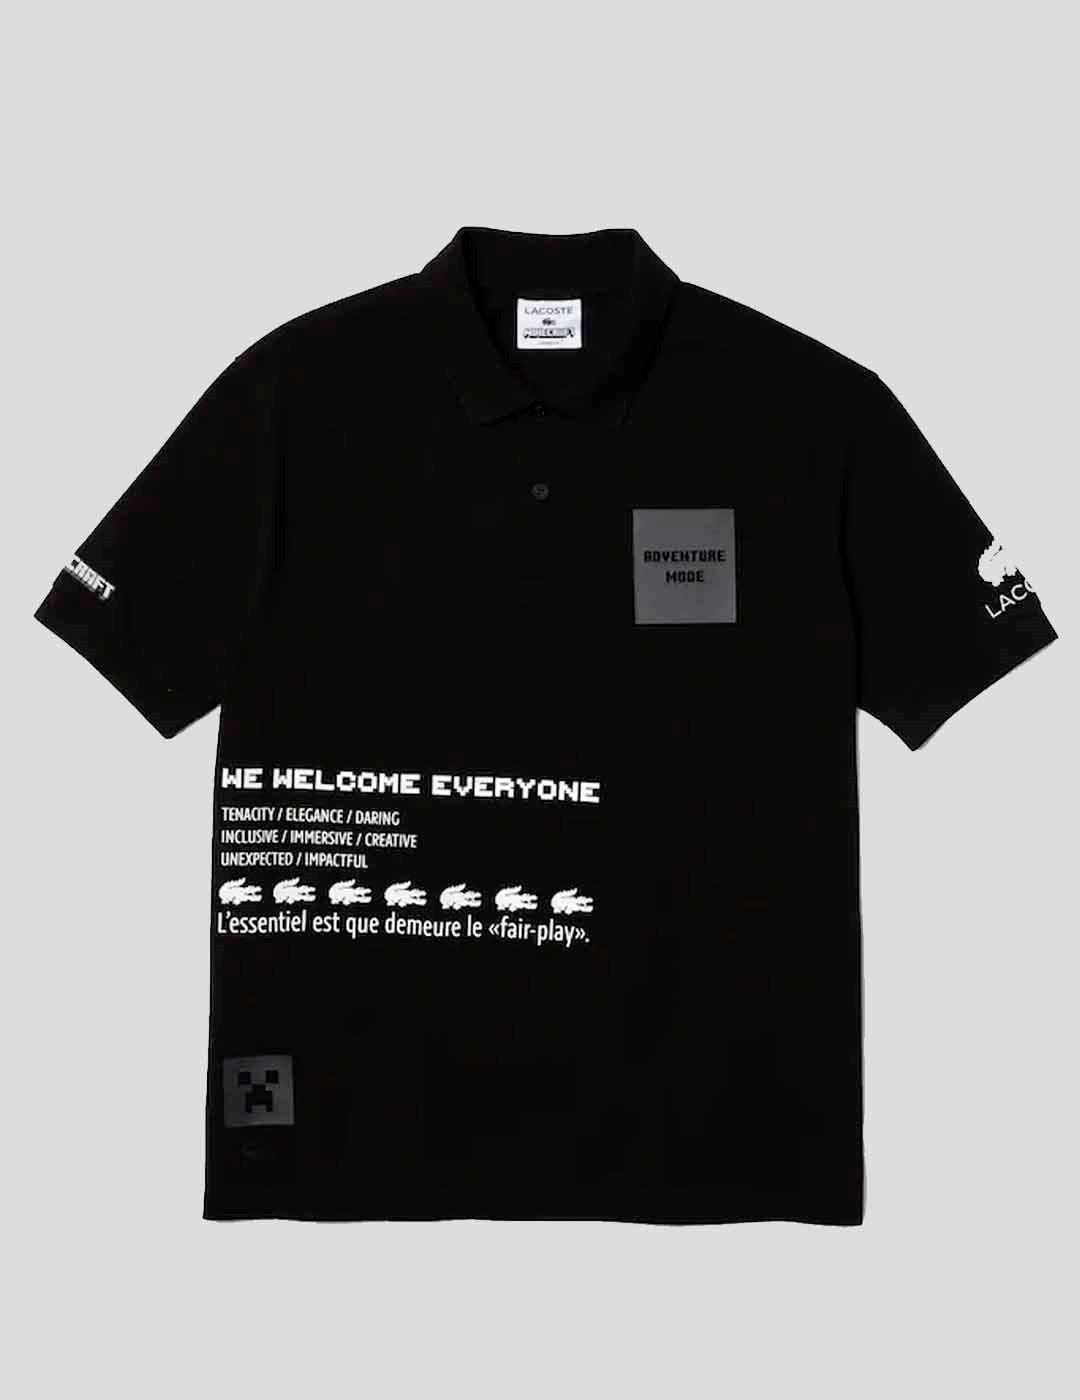 CAMISETA LACOSTE X MINECRAFT RELAXED FIT POLO BLACK